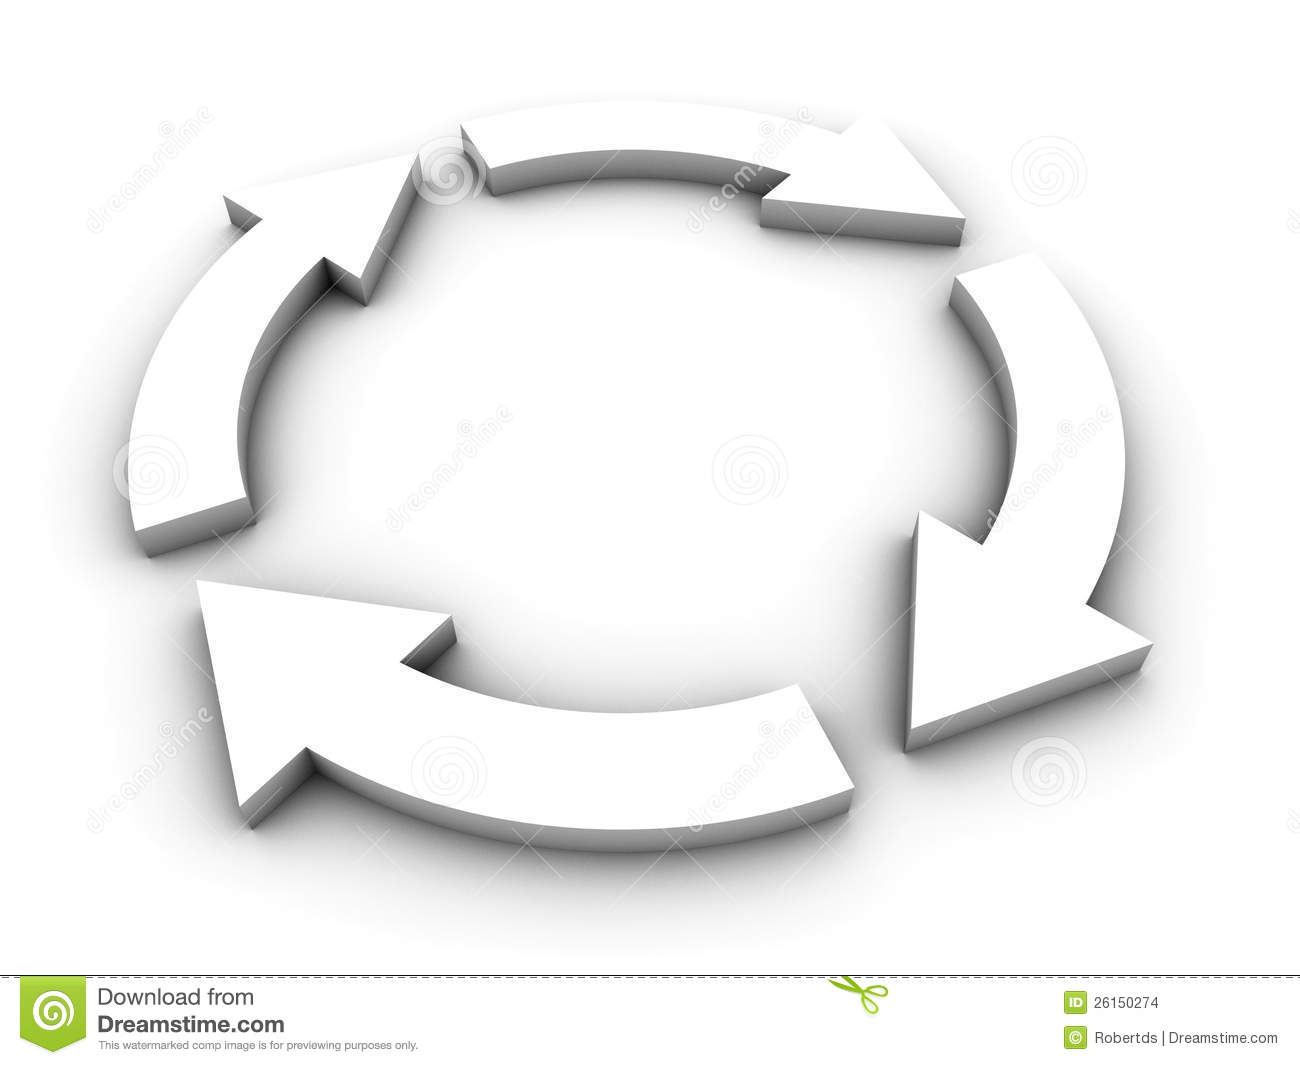 Circular Flow Diagram With Arrows Stock Images   Image  26150274